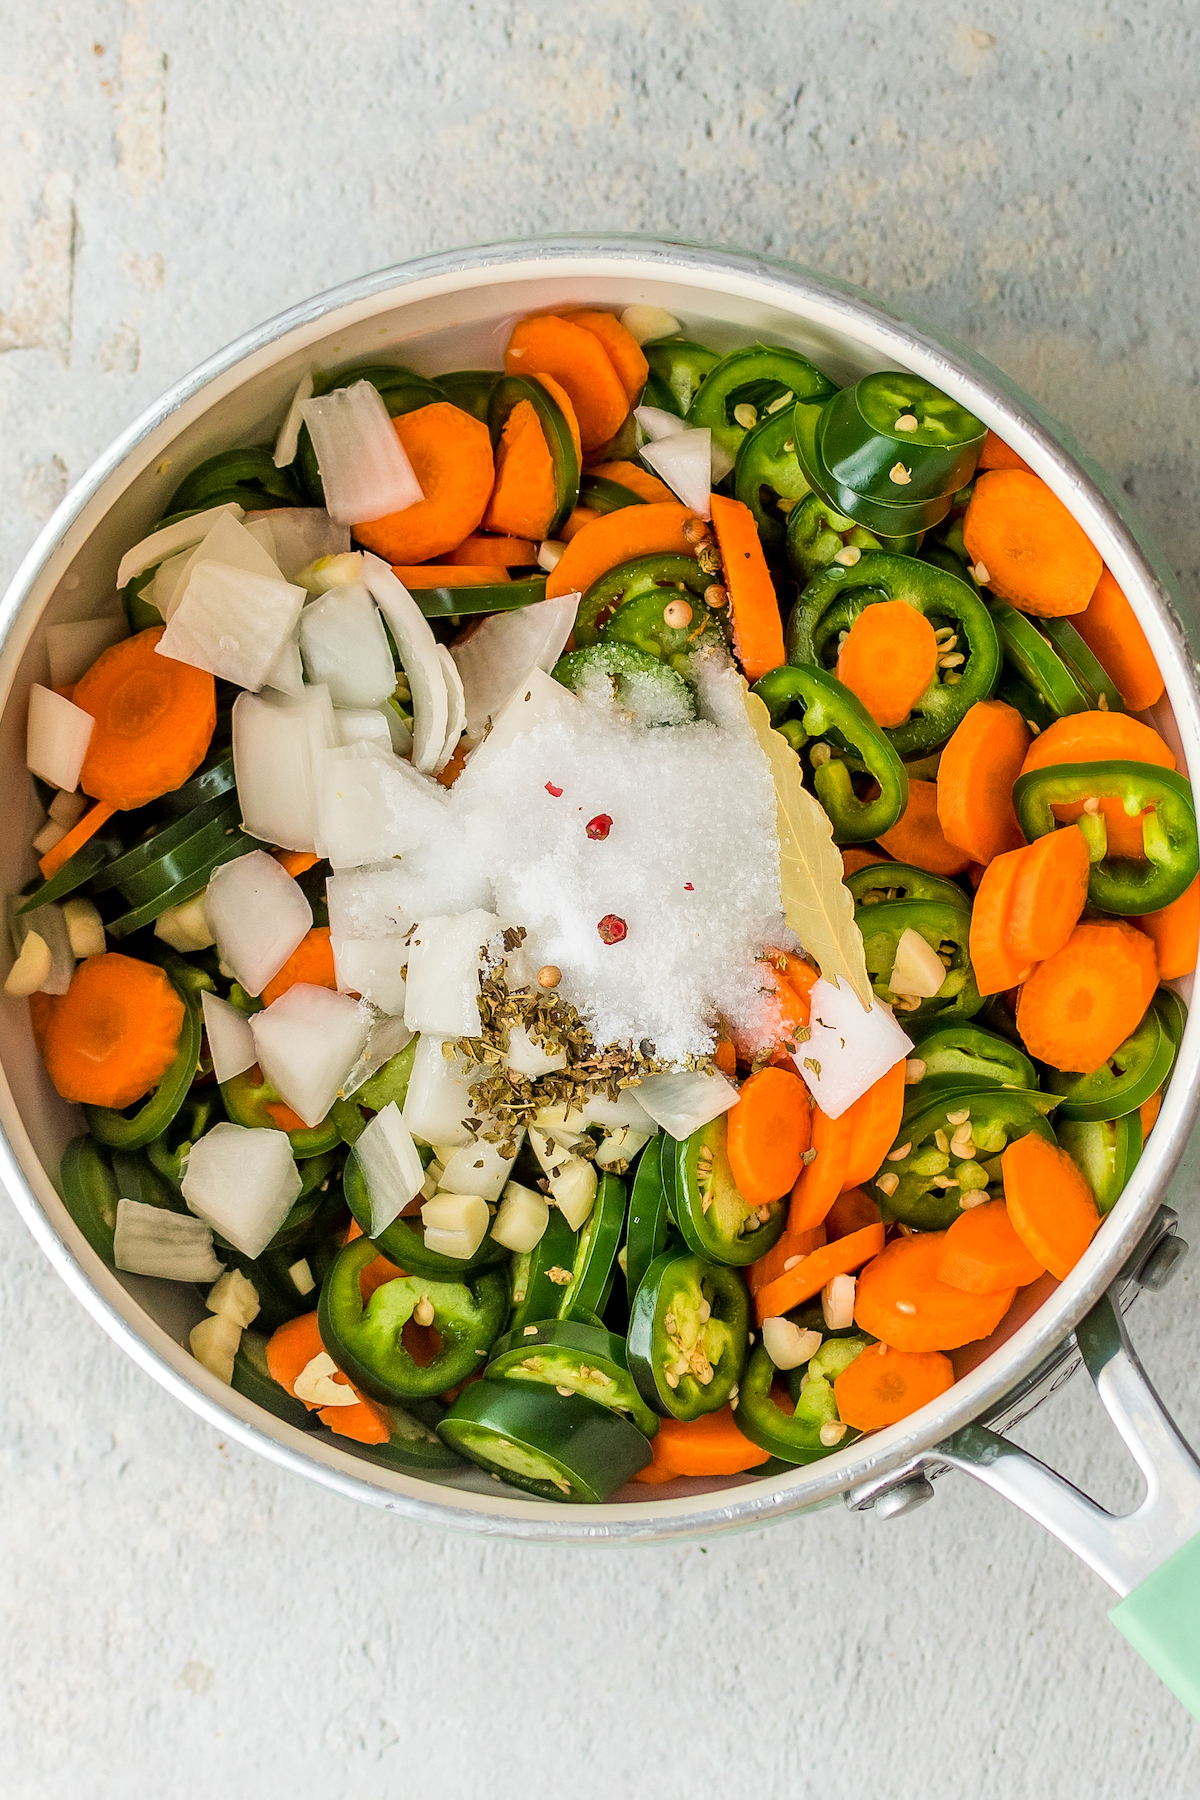 Carrots, onions, jalapenos, vinegar, and other pickling ingredients in a saucepan.